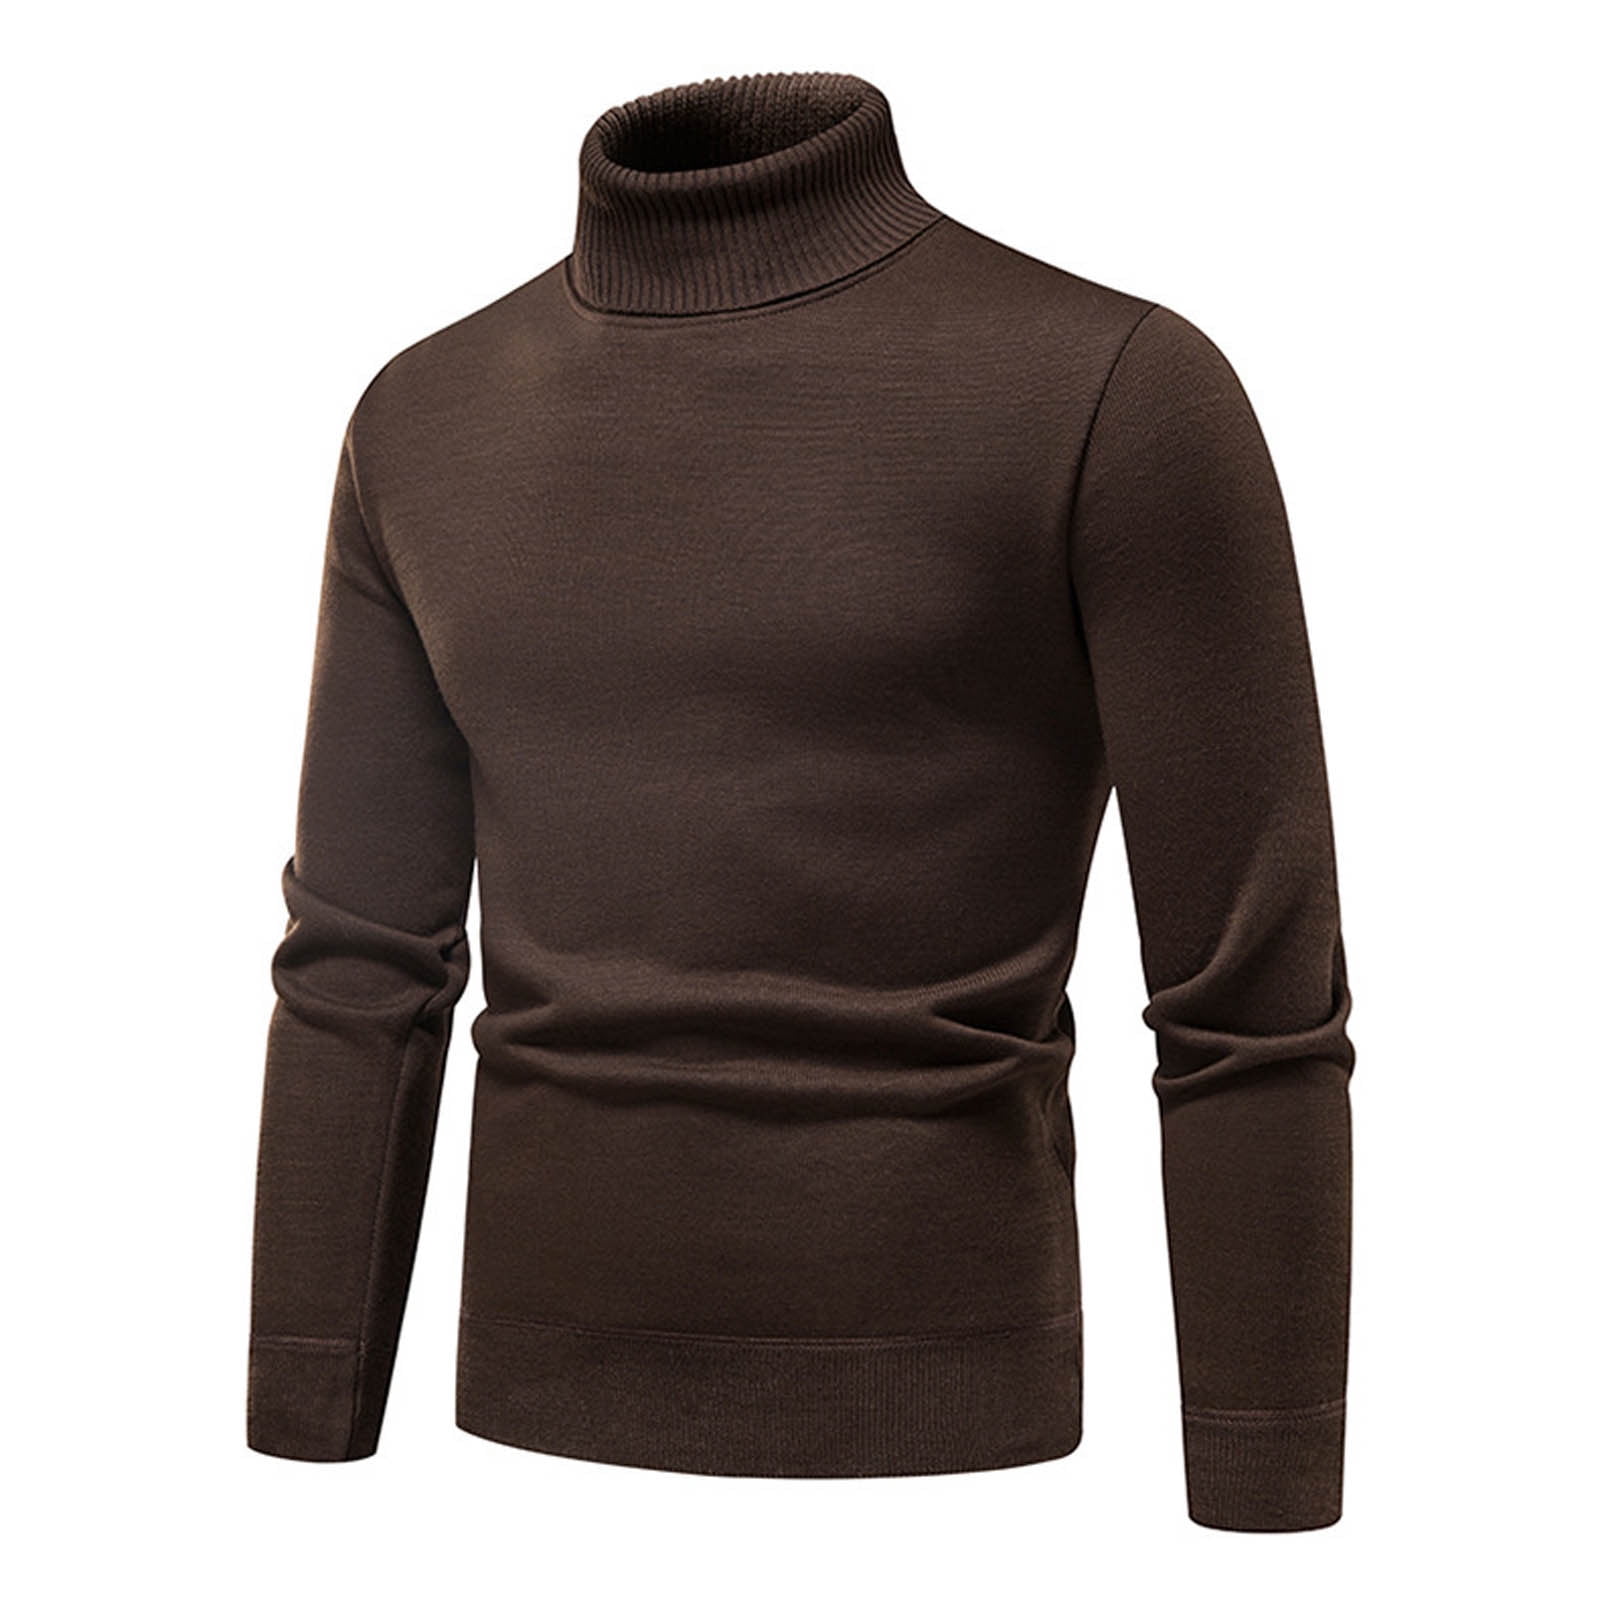 2022 Letter Jacquard Half Turtleneck Sweater Men Fashion Slim Long Sleeve  Knitted Pullovers Casual Business Social Knitwear Tops